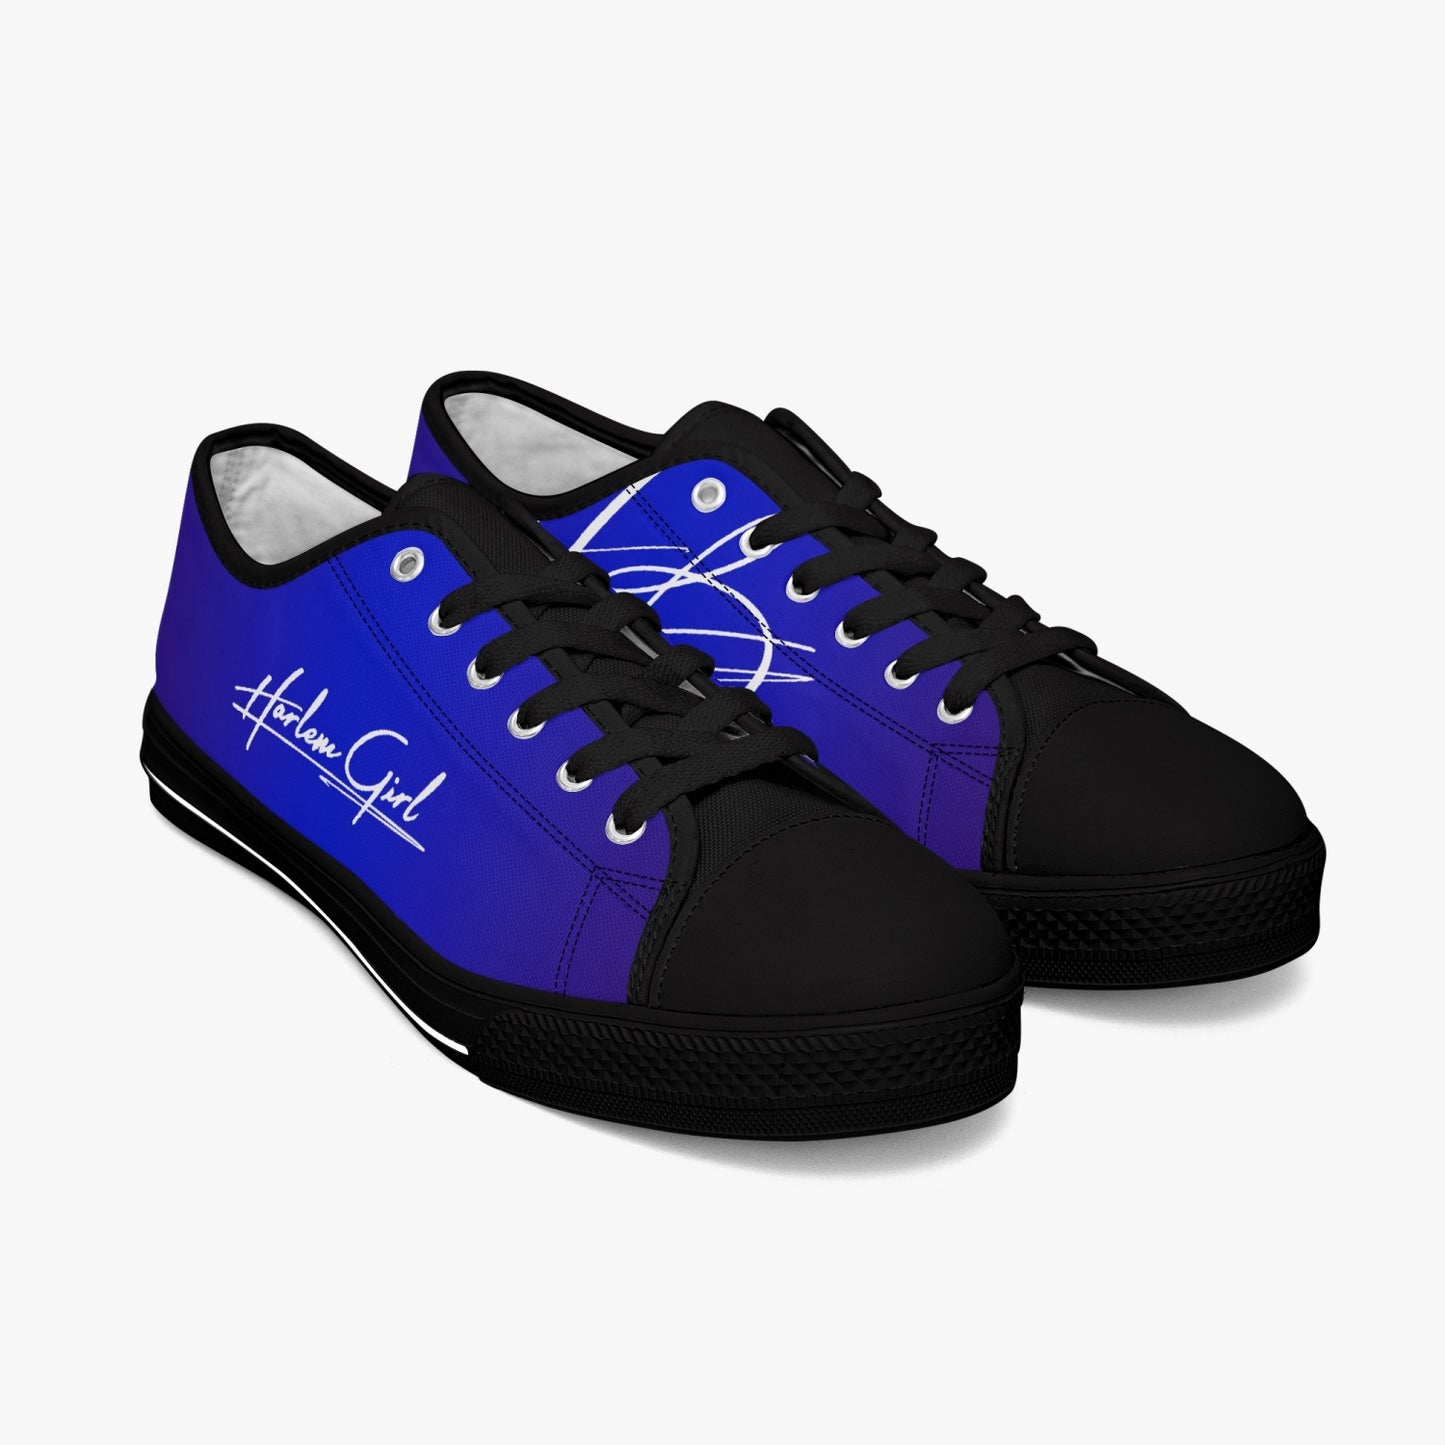 Harlem Girl "Coolee High" Womens Low-Top Canvas Sneaks - Sapphire